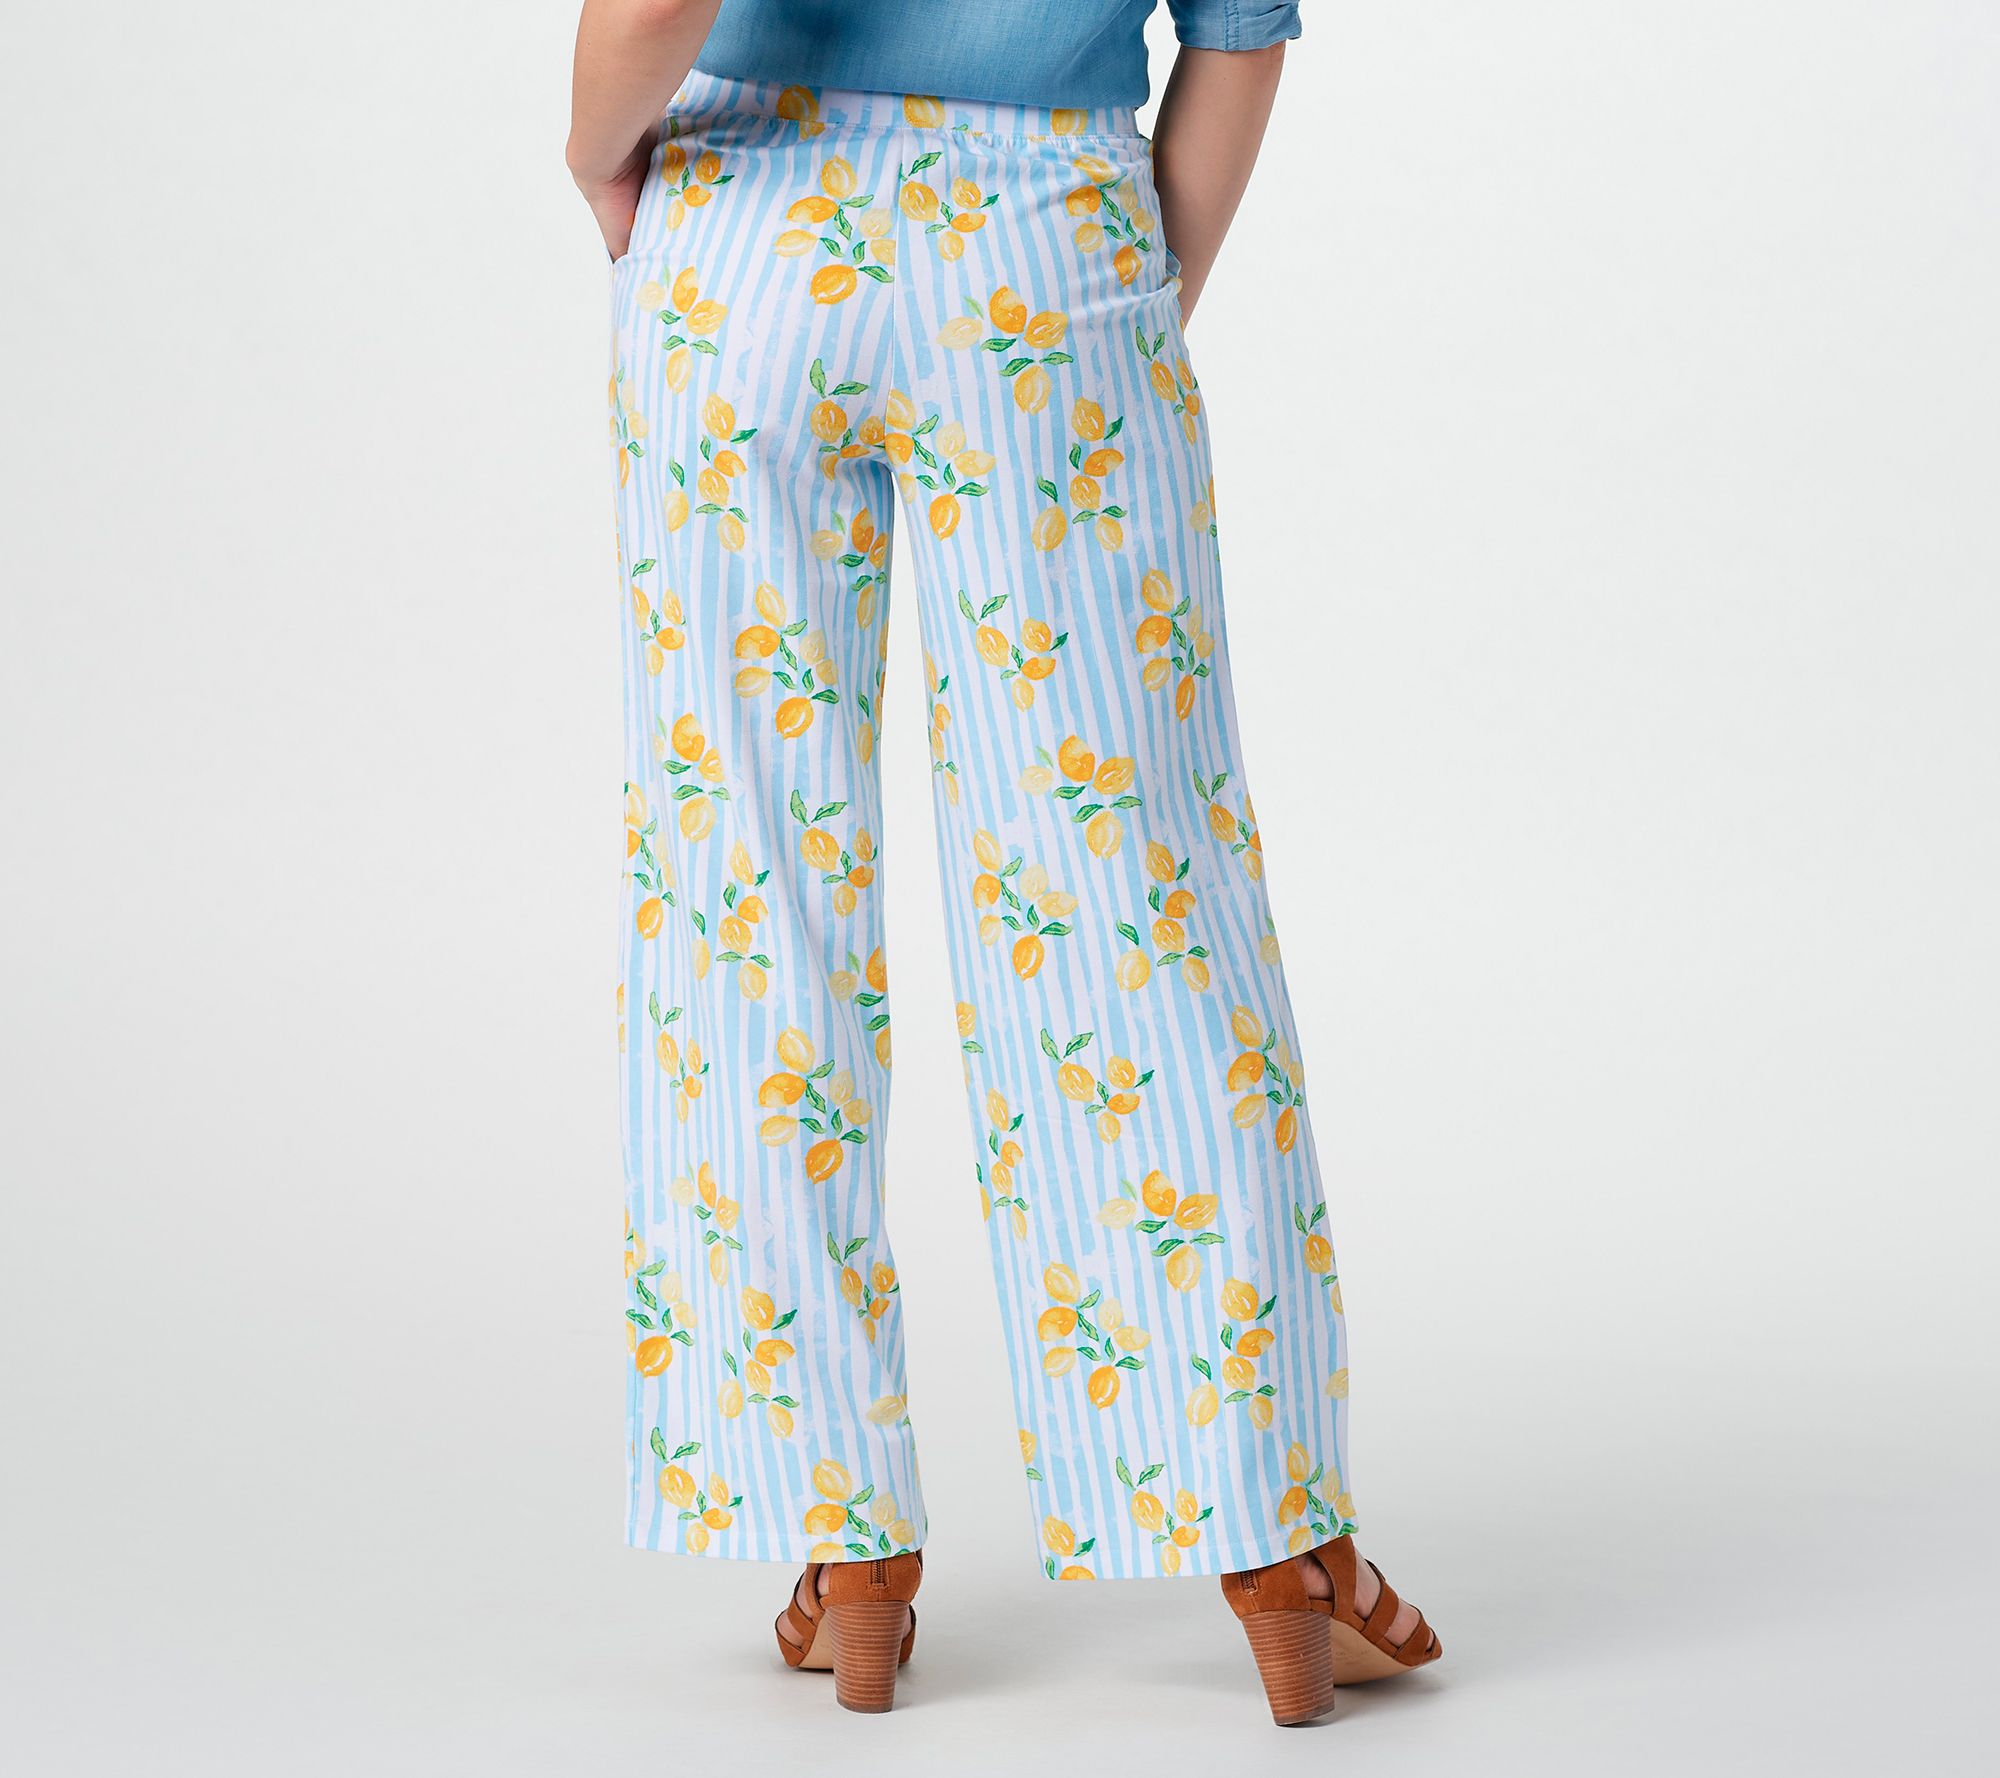 Denim & Co Petite Beach Pull-on Pants Side Slits Floral PL NEW A351804